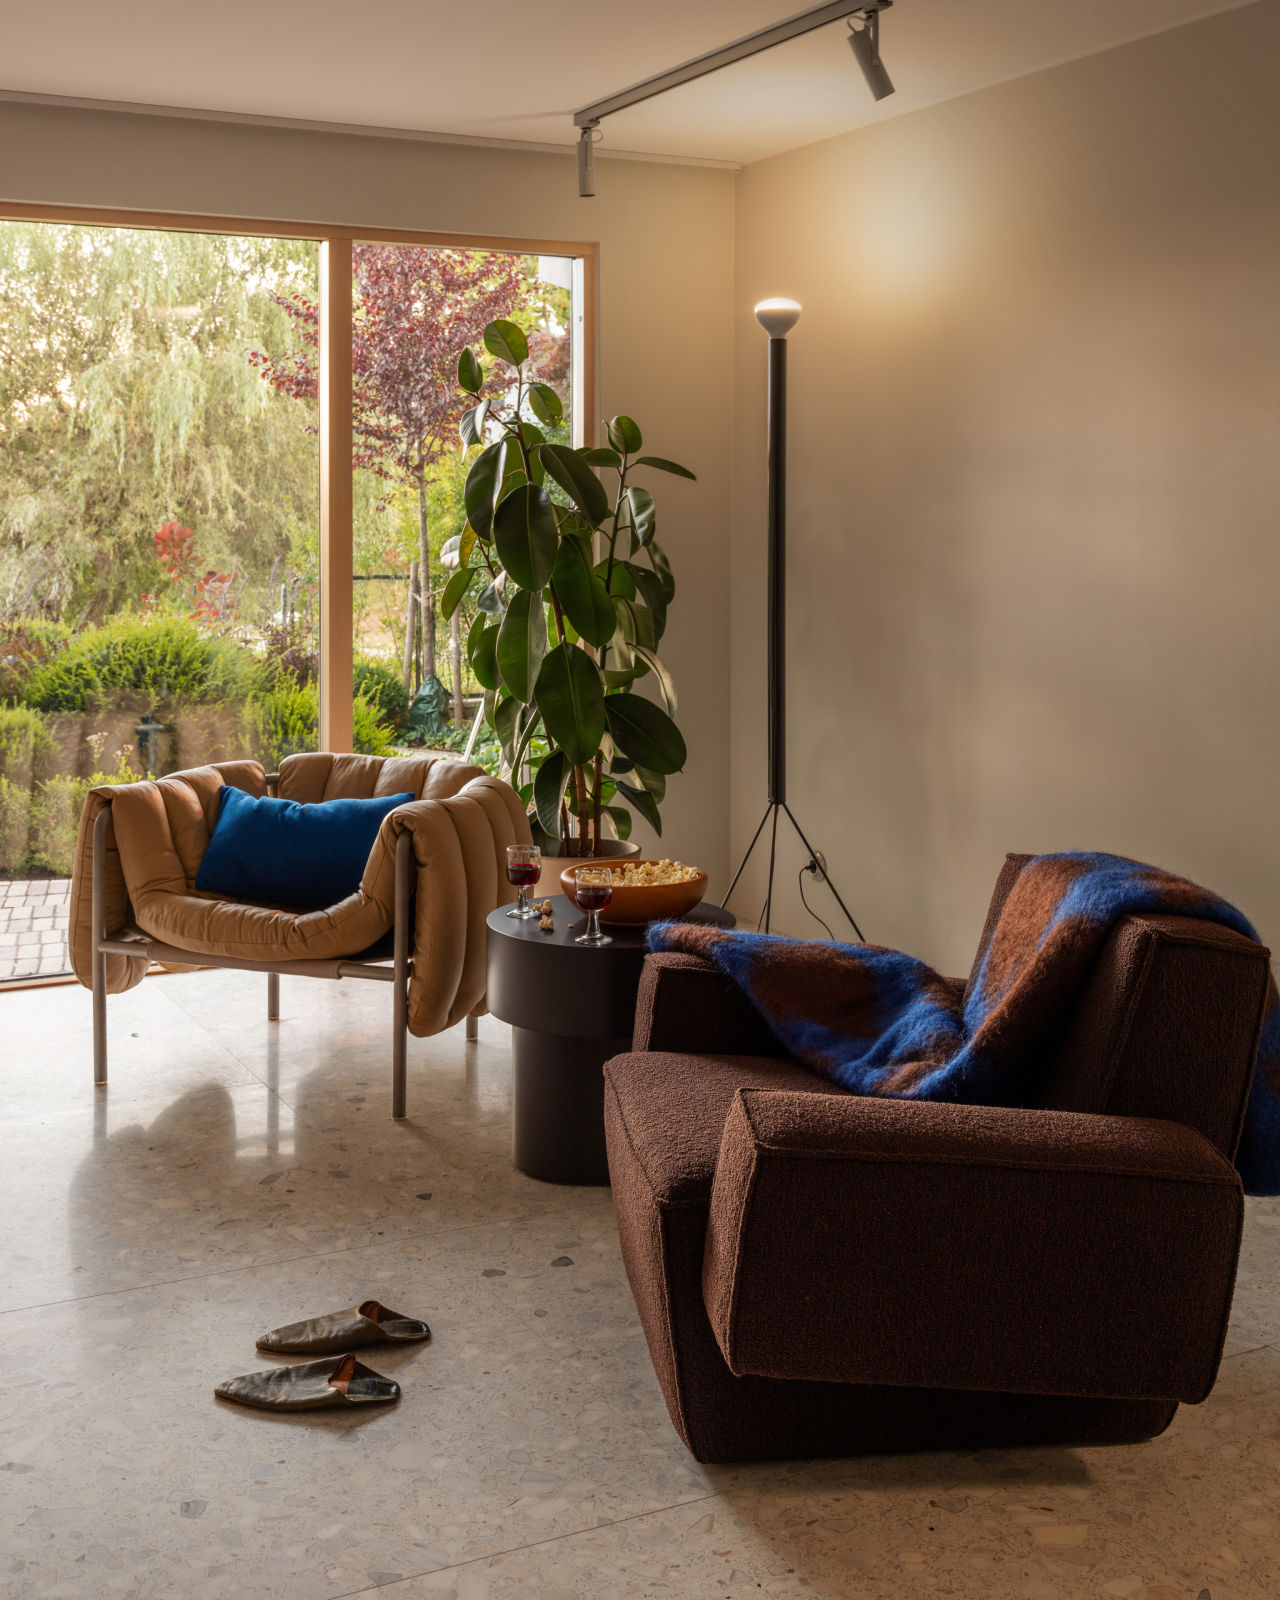 A lifestyle image of a lounge scene featuring Puffy Lounge Chair, Hunk Lounge Chair with Armrests, Storm Cushion Large, Monster Throw, and Stump Side Table.